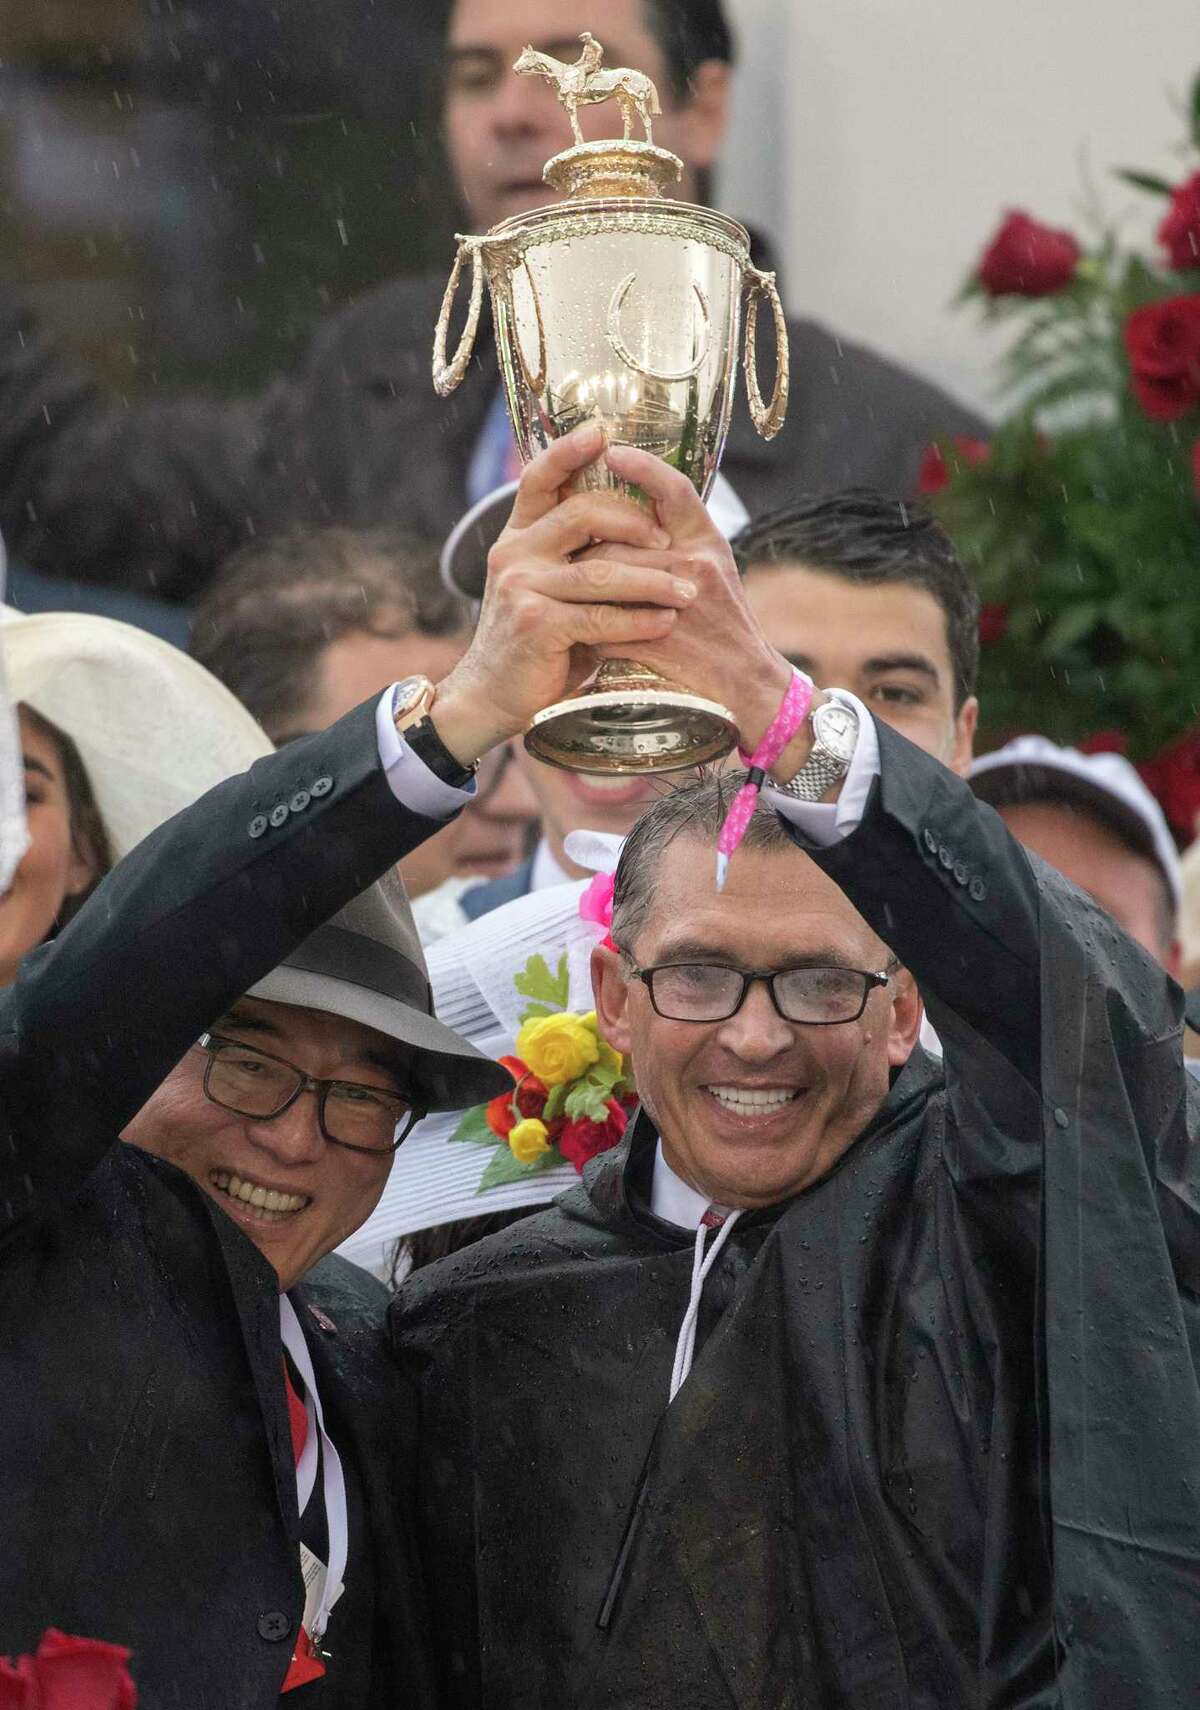 Owners Ah KhingTeo, left and Kenny Troutt hold up the Derby trophy in the winner's circle after their horse Justify won the 144th running of the Kentucky Derby at Churchill Downs Saturday May 5, 2018 in Louisville, Kentucky (Skip Dickstein/Times Union)